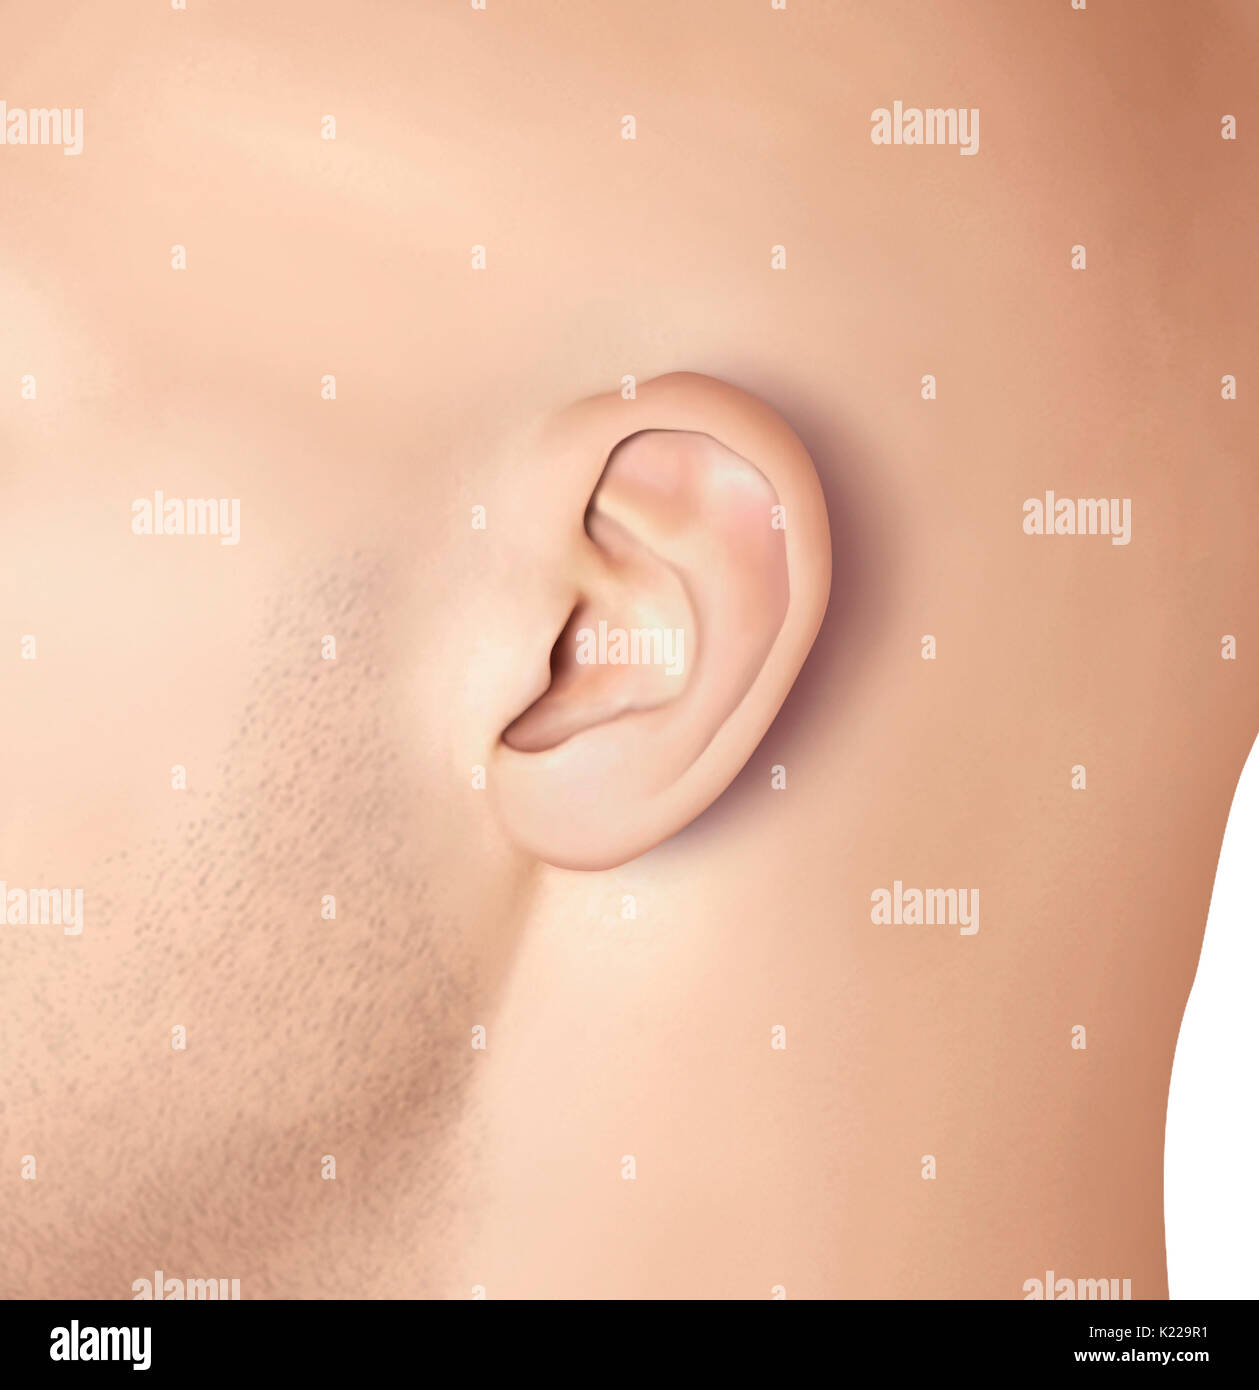 Soft cartilaginous outer portion of the ear located at the side of the head;.it allows sounds to be collected. It is also called the auricle. Stock Photo